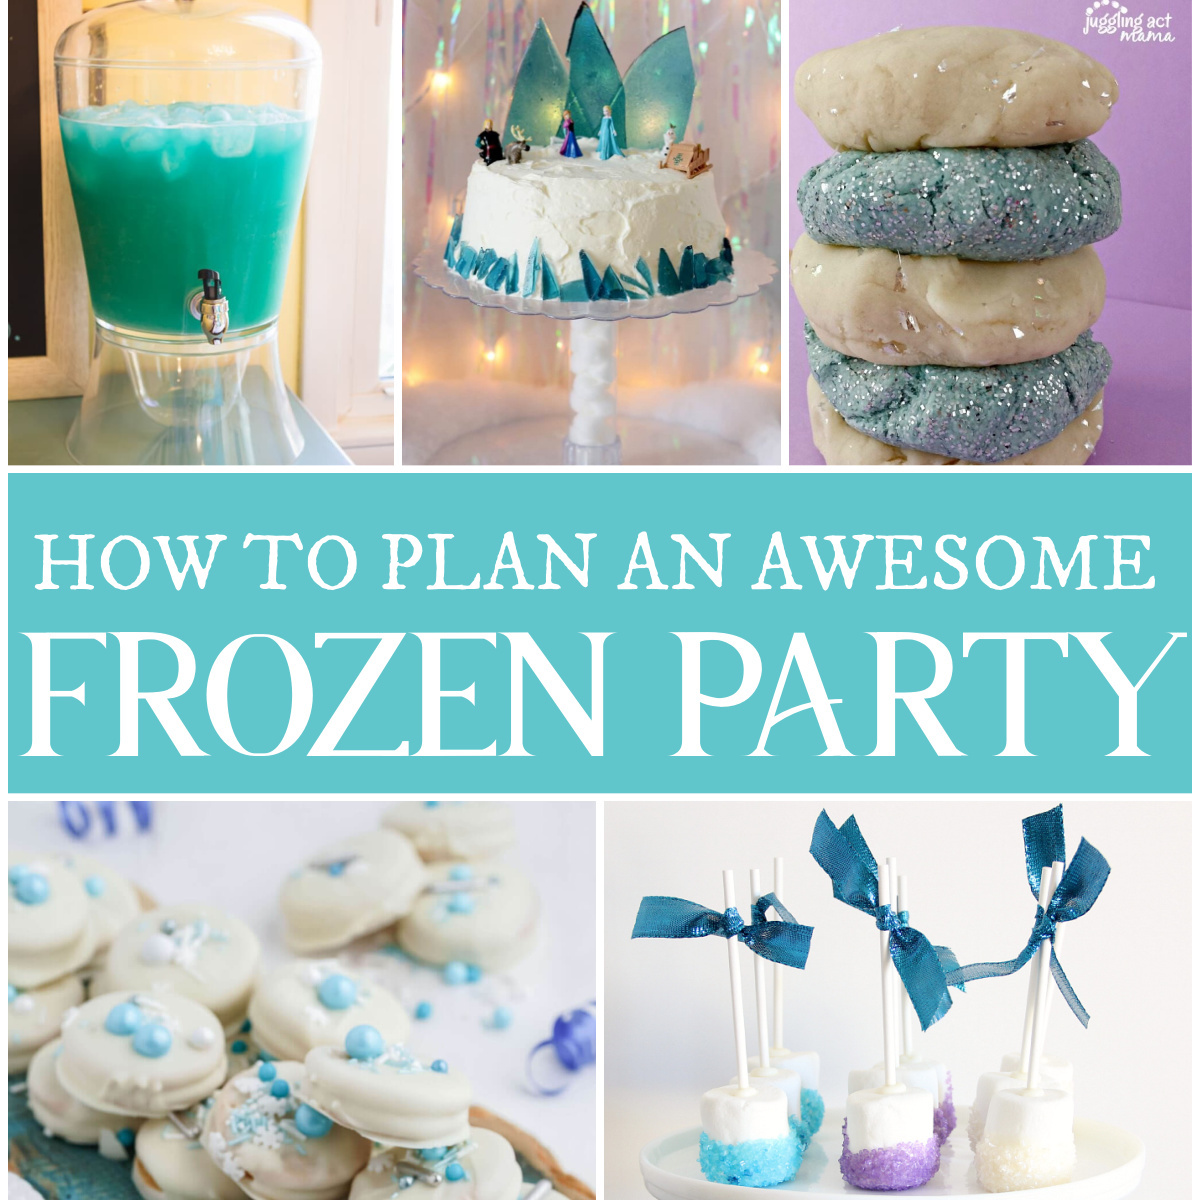 Frozen Party square collage with text overlay.